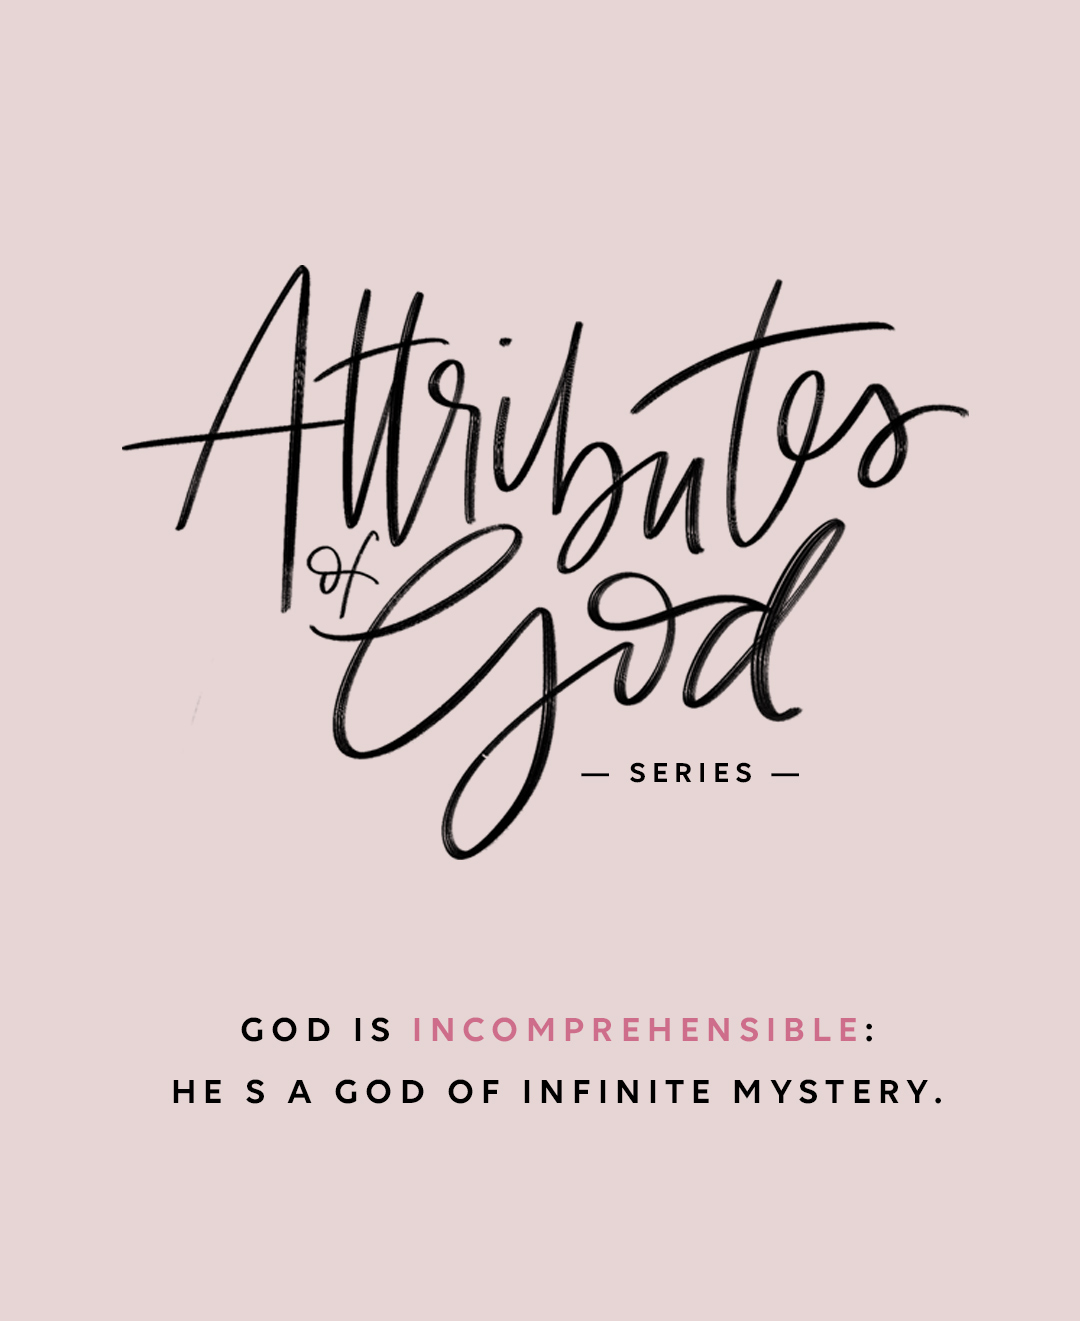 god is incomprehensible attributes of god series